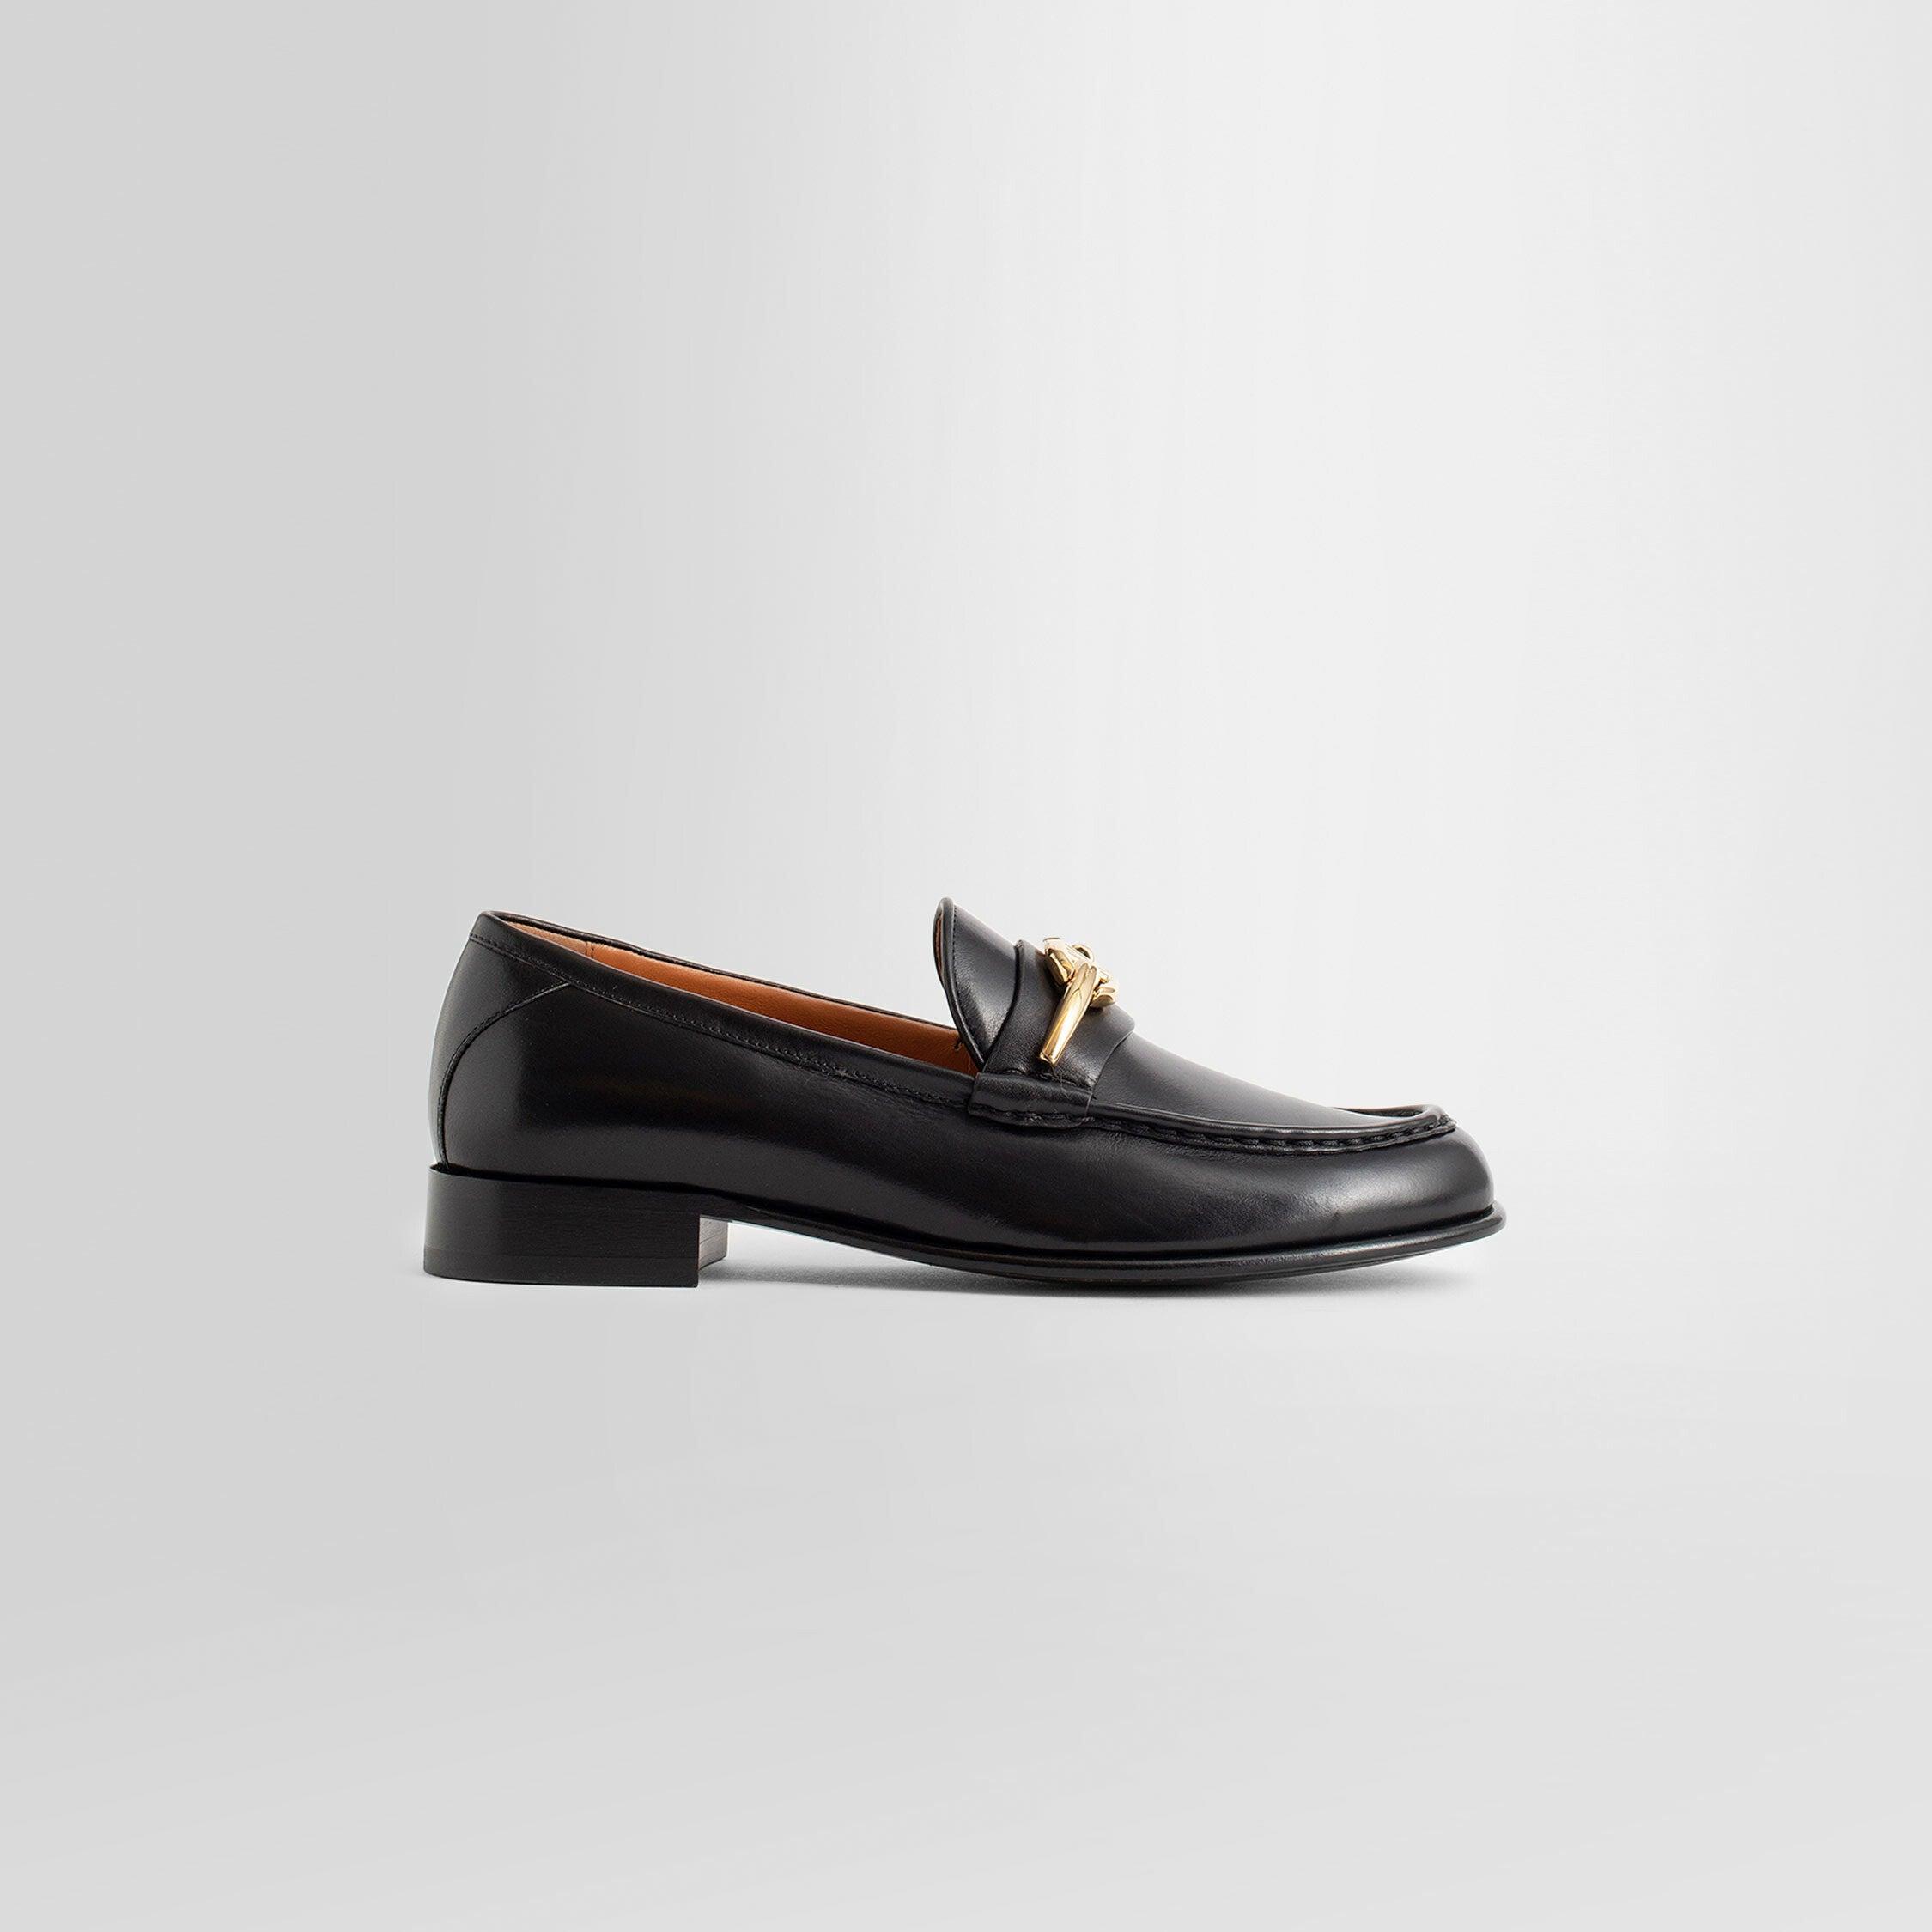 VALENTINO WOMAN BLACK LOAFERS